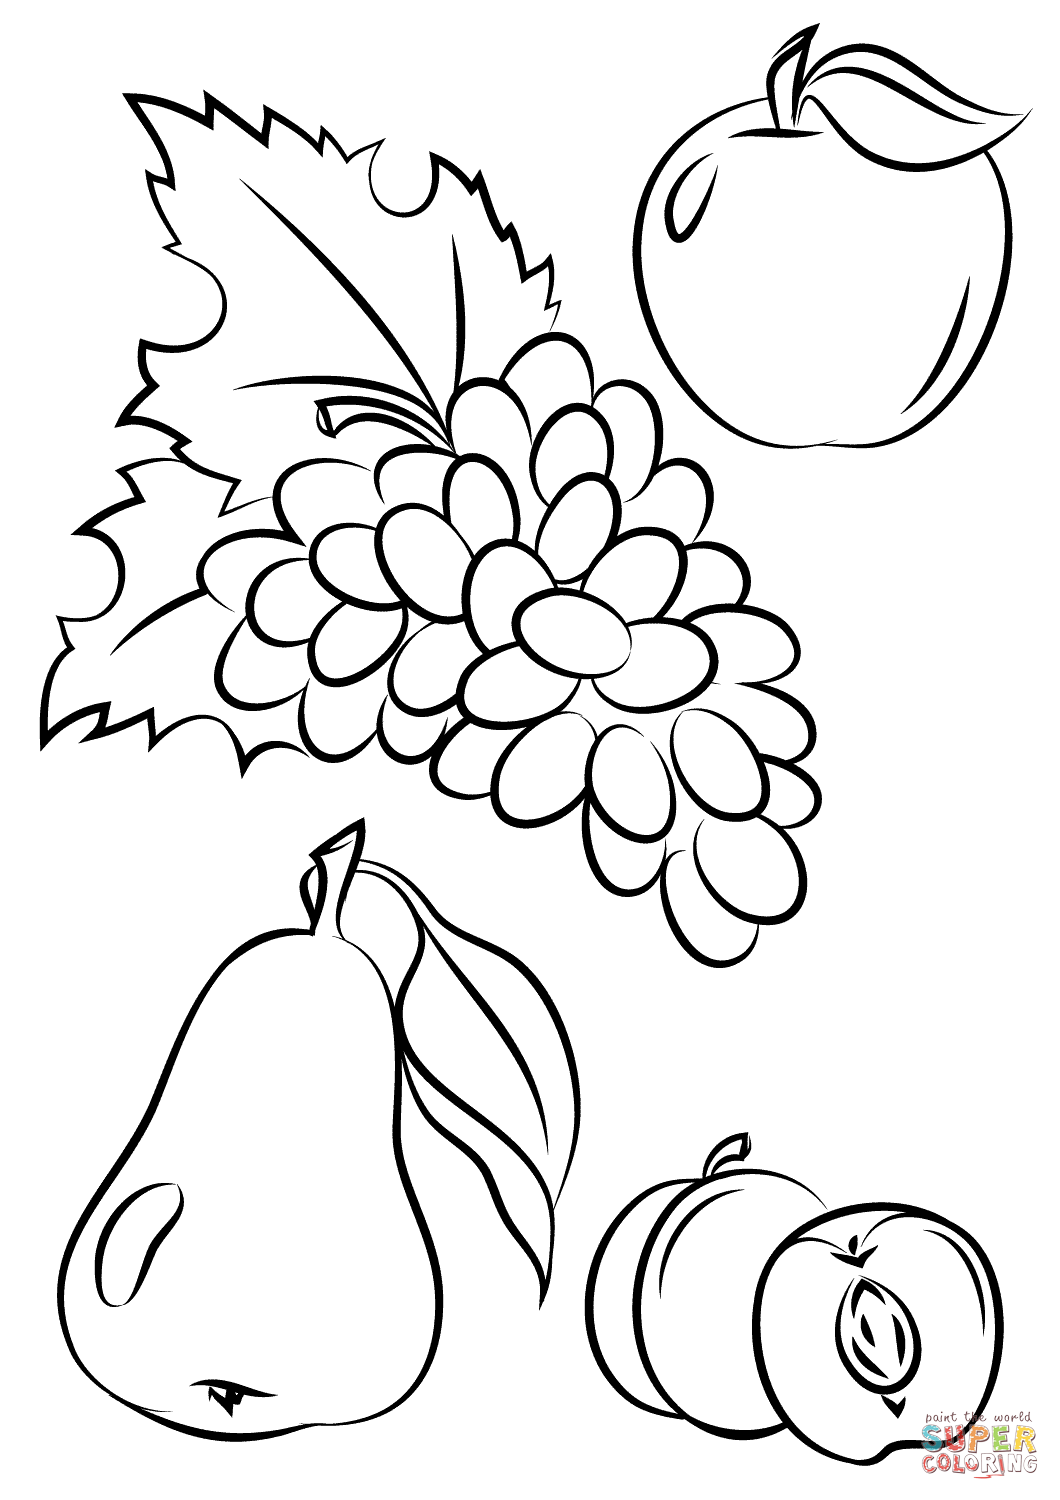 Autumn Fruits Coloring Pages